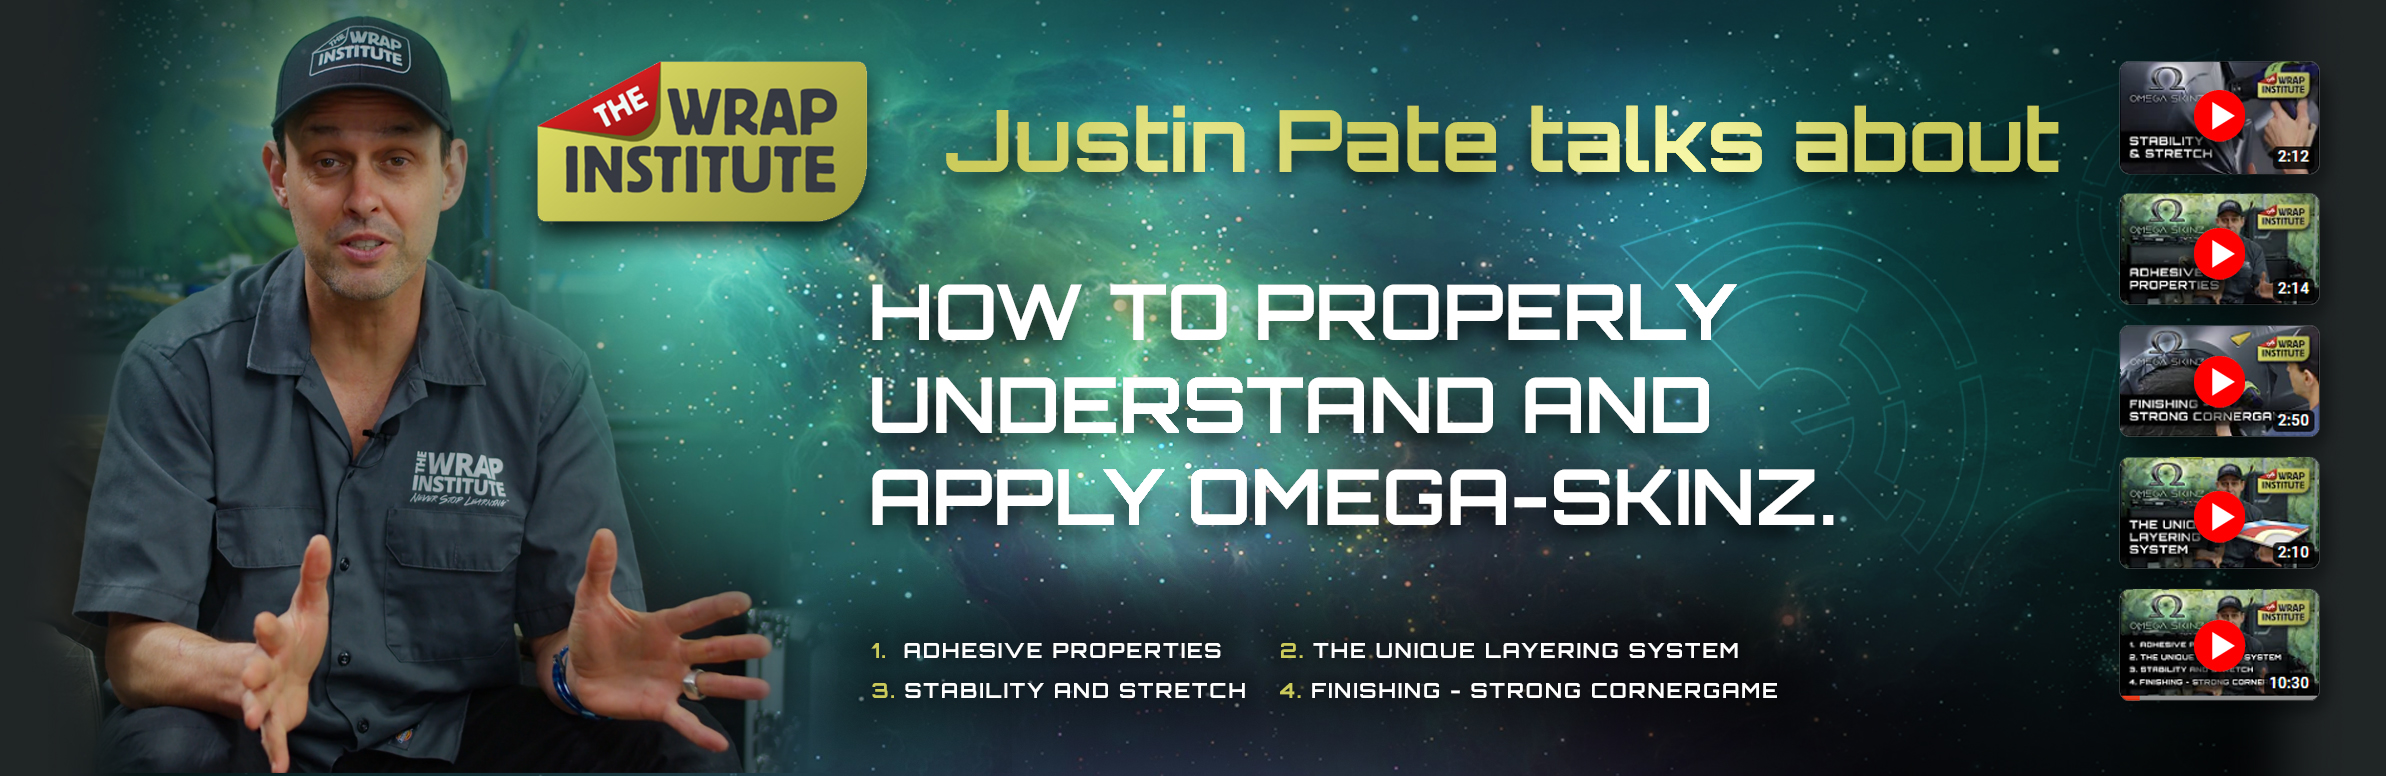 Justin Pate about Omega-Skinz